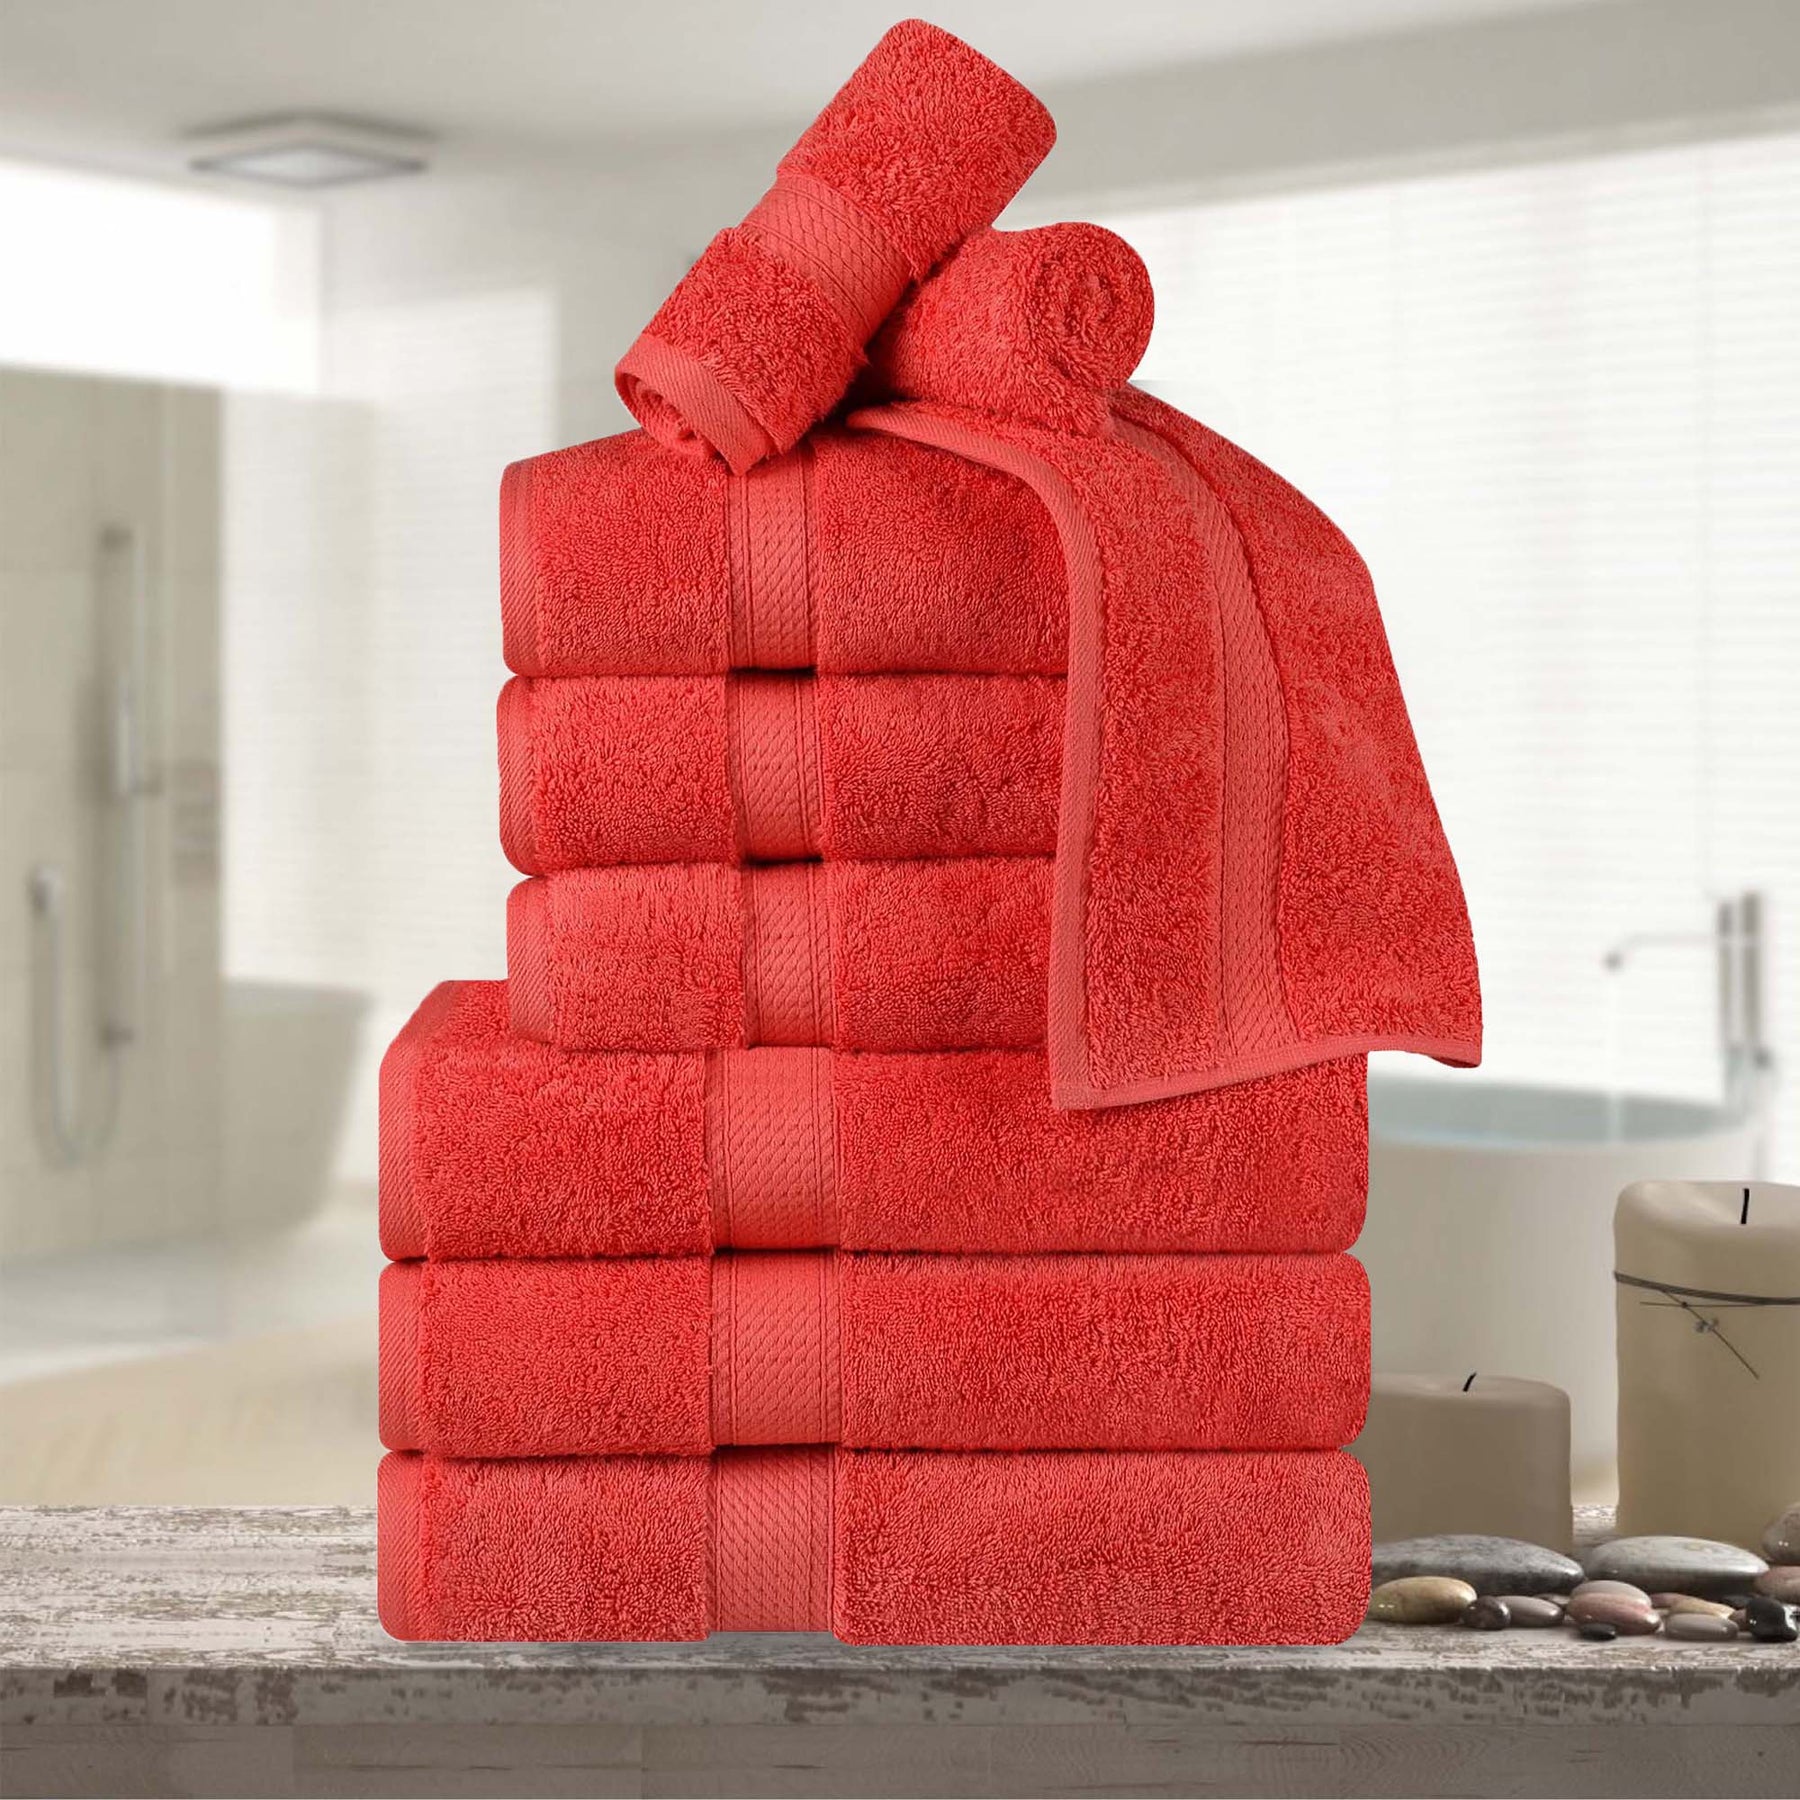 Superior Egyptian Cotton Plush Heavyweight Absorbent Luxury Soft 9-Piece Towel Set - Coral